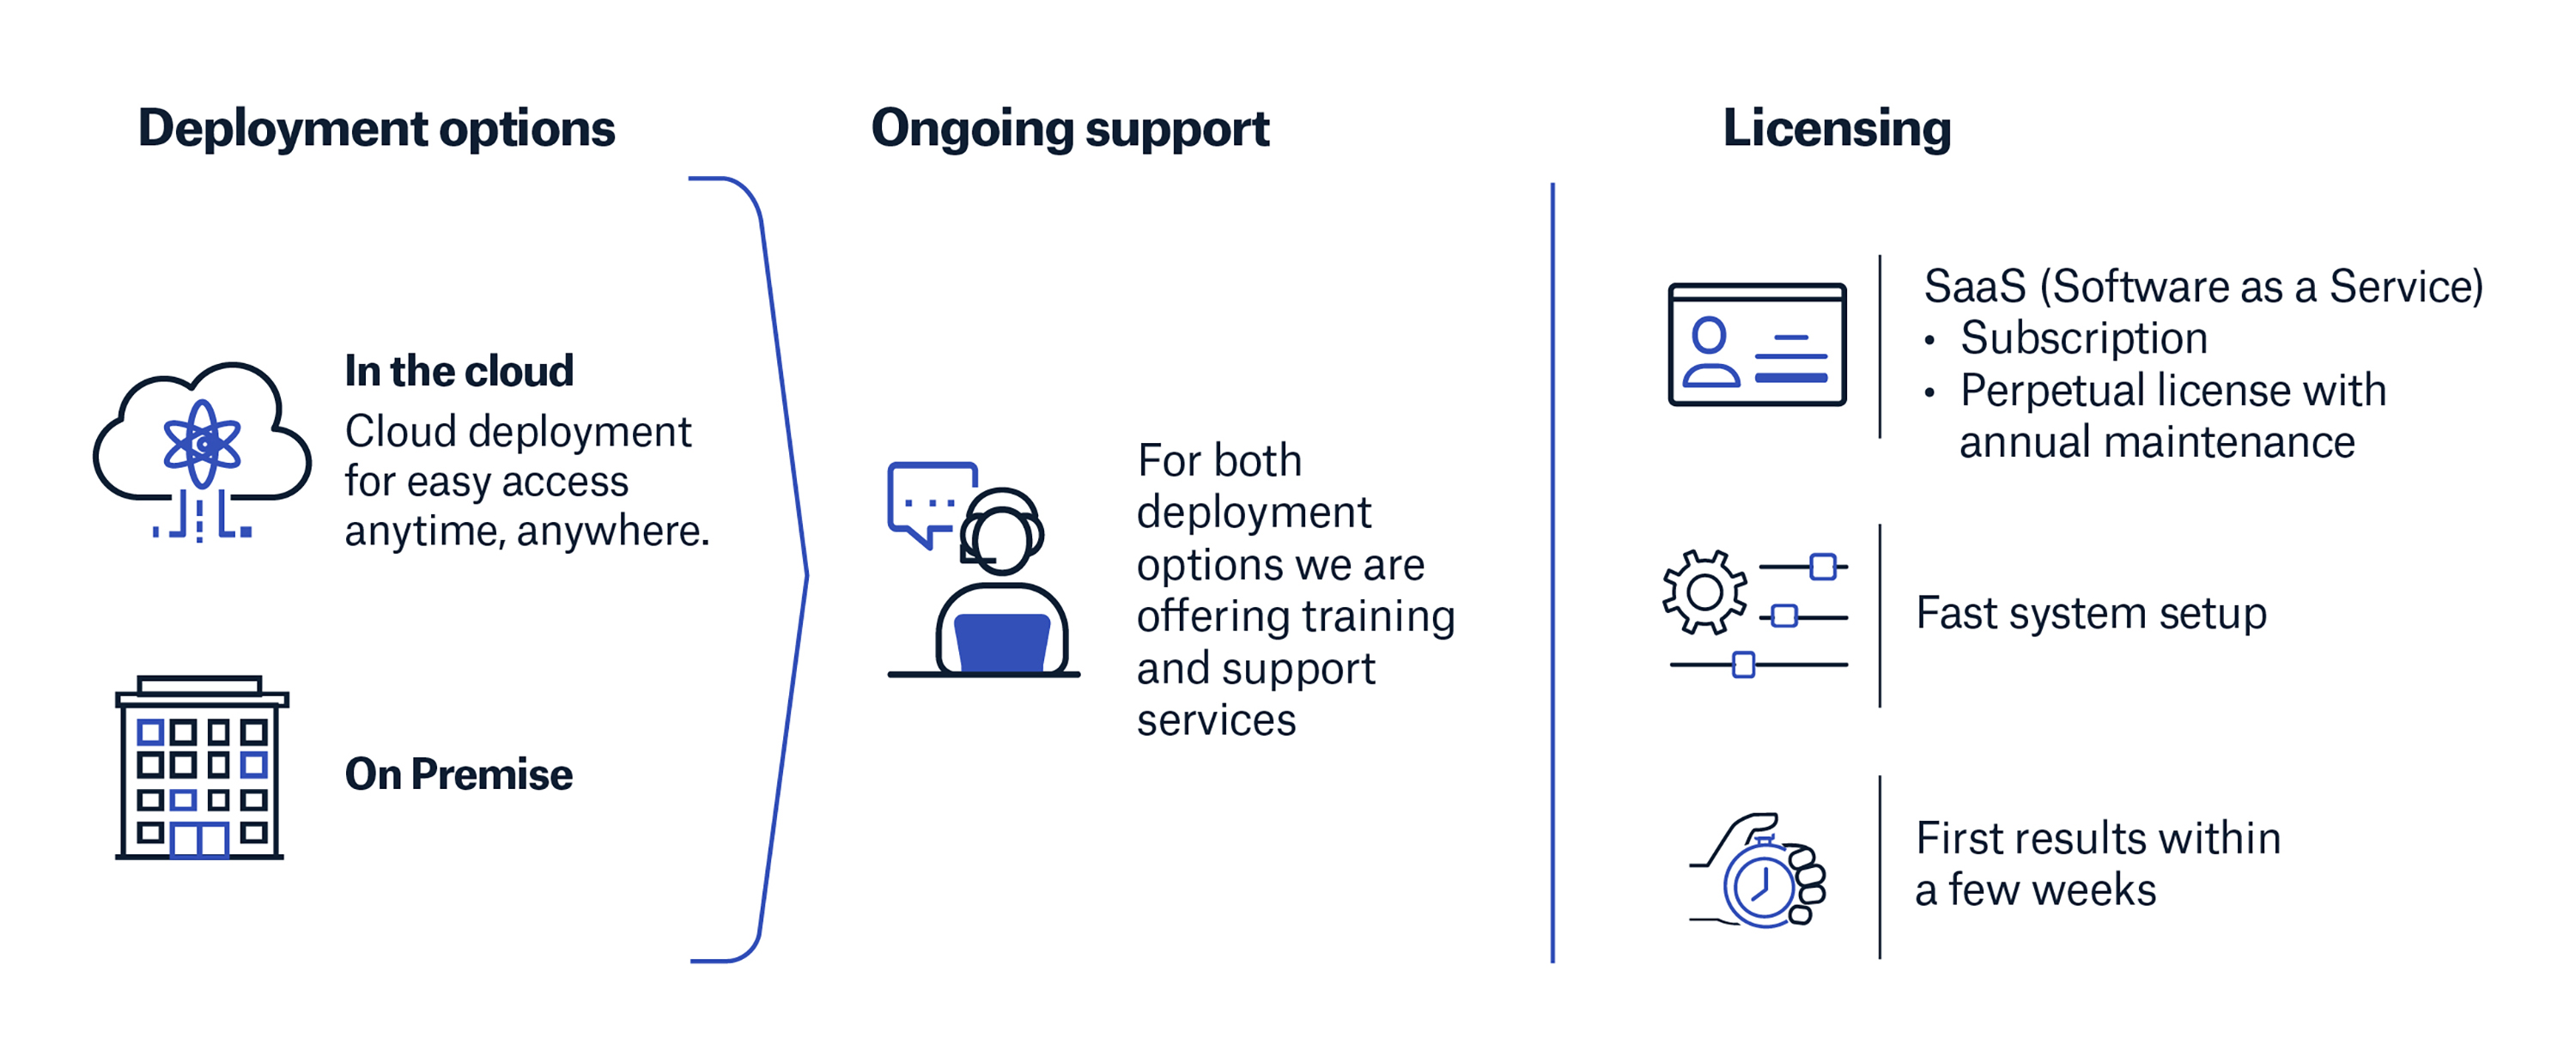 Deployment and licensing options that work best for your business